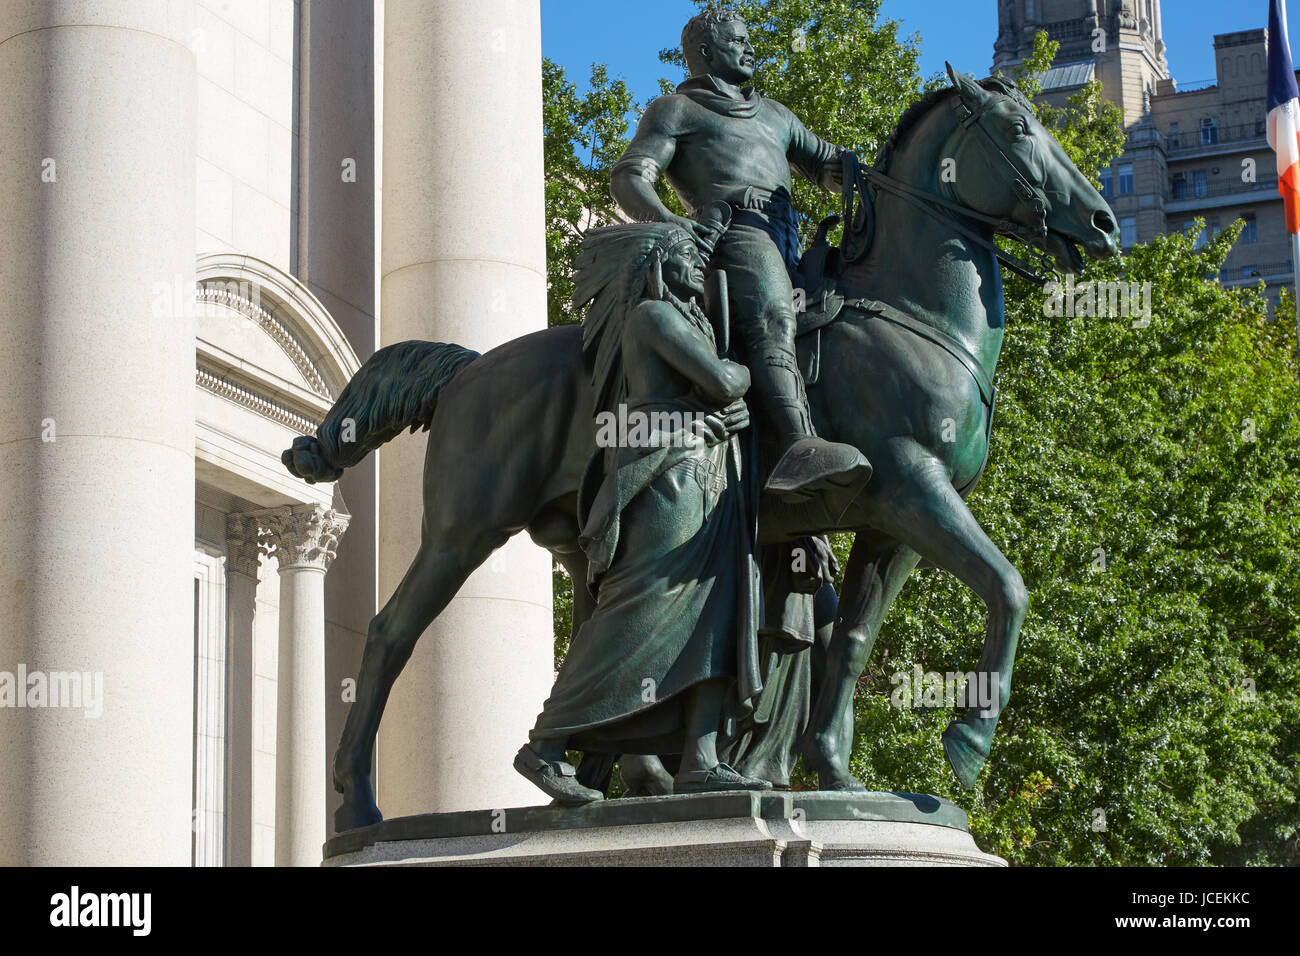 NEW YORK - SEPTEMBER 13: President Theodore Roosevelt equestrian statue in front of American Museum of Natural History in a sunny day, blue sky Stock Photo